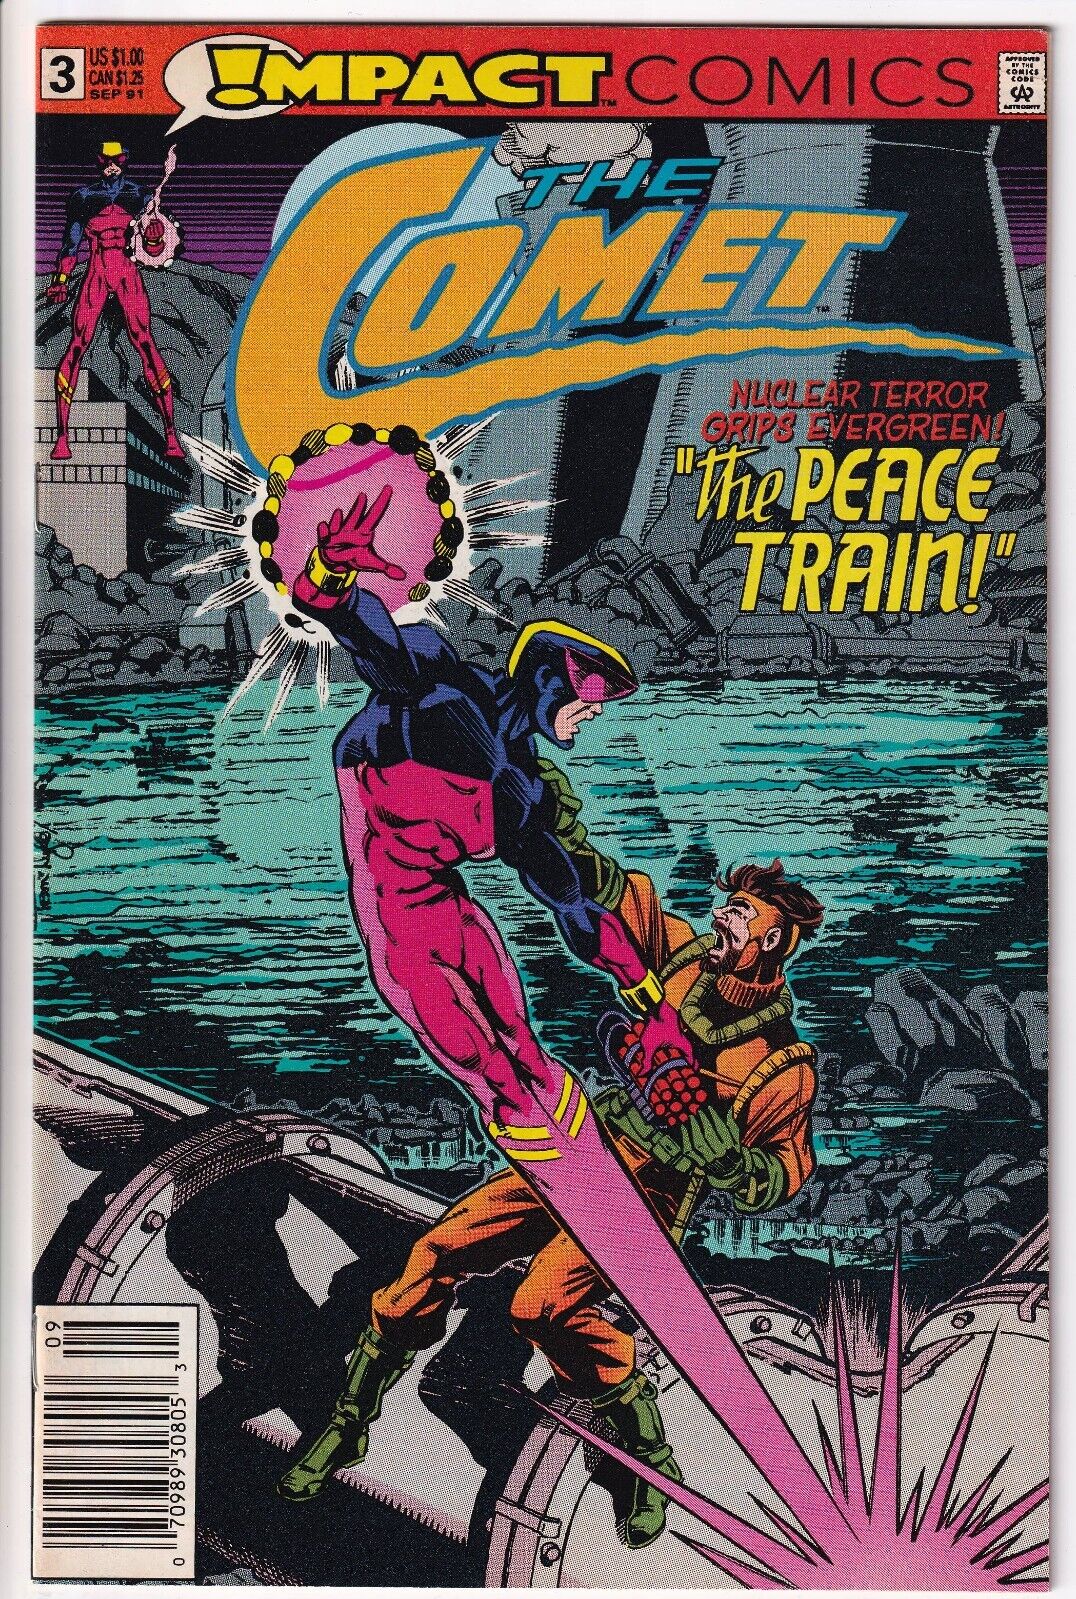 The Comet #3 - Impact Comics 1991 *NEWSSTAND EDITION*